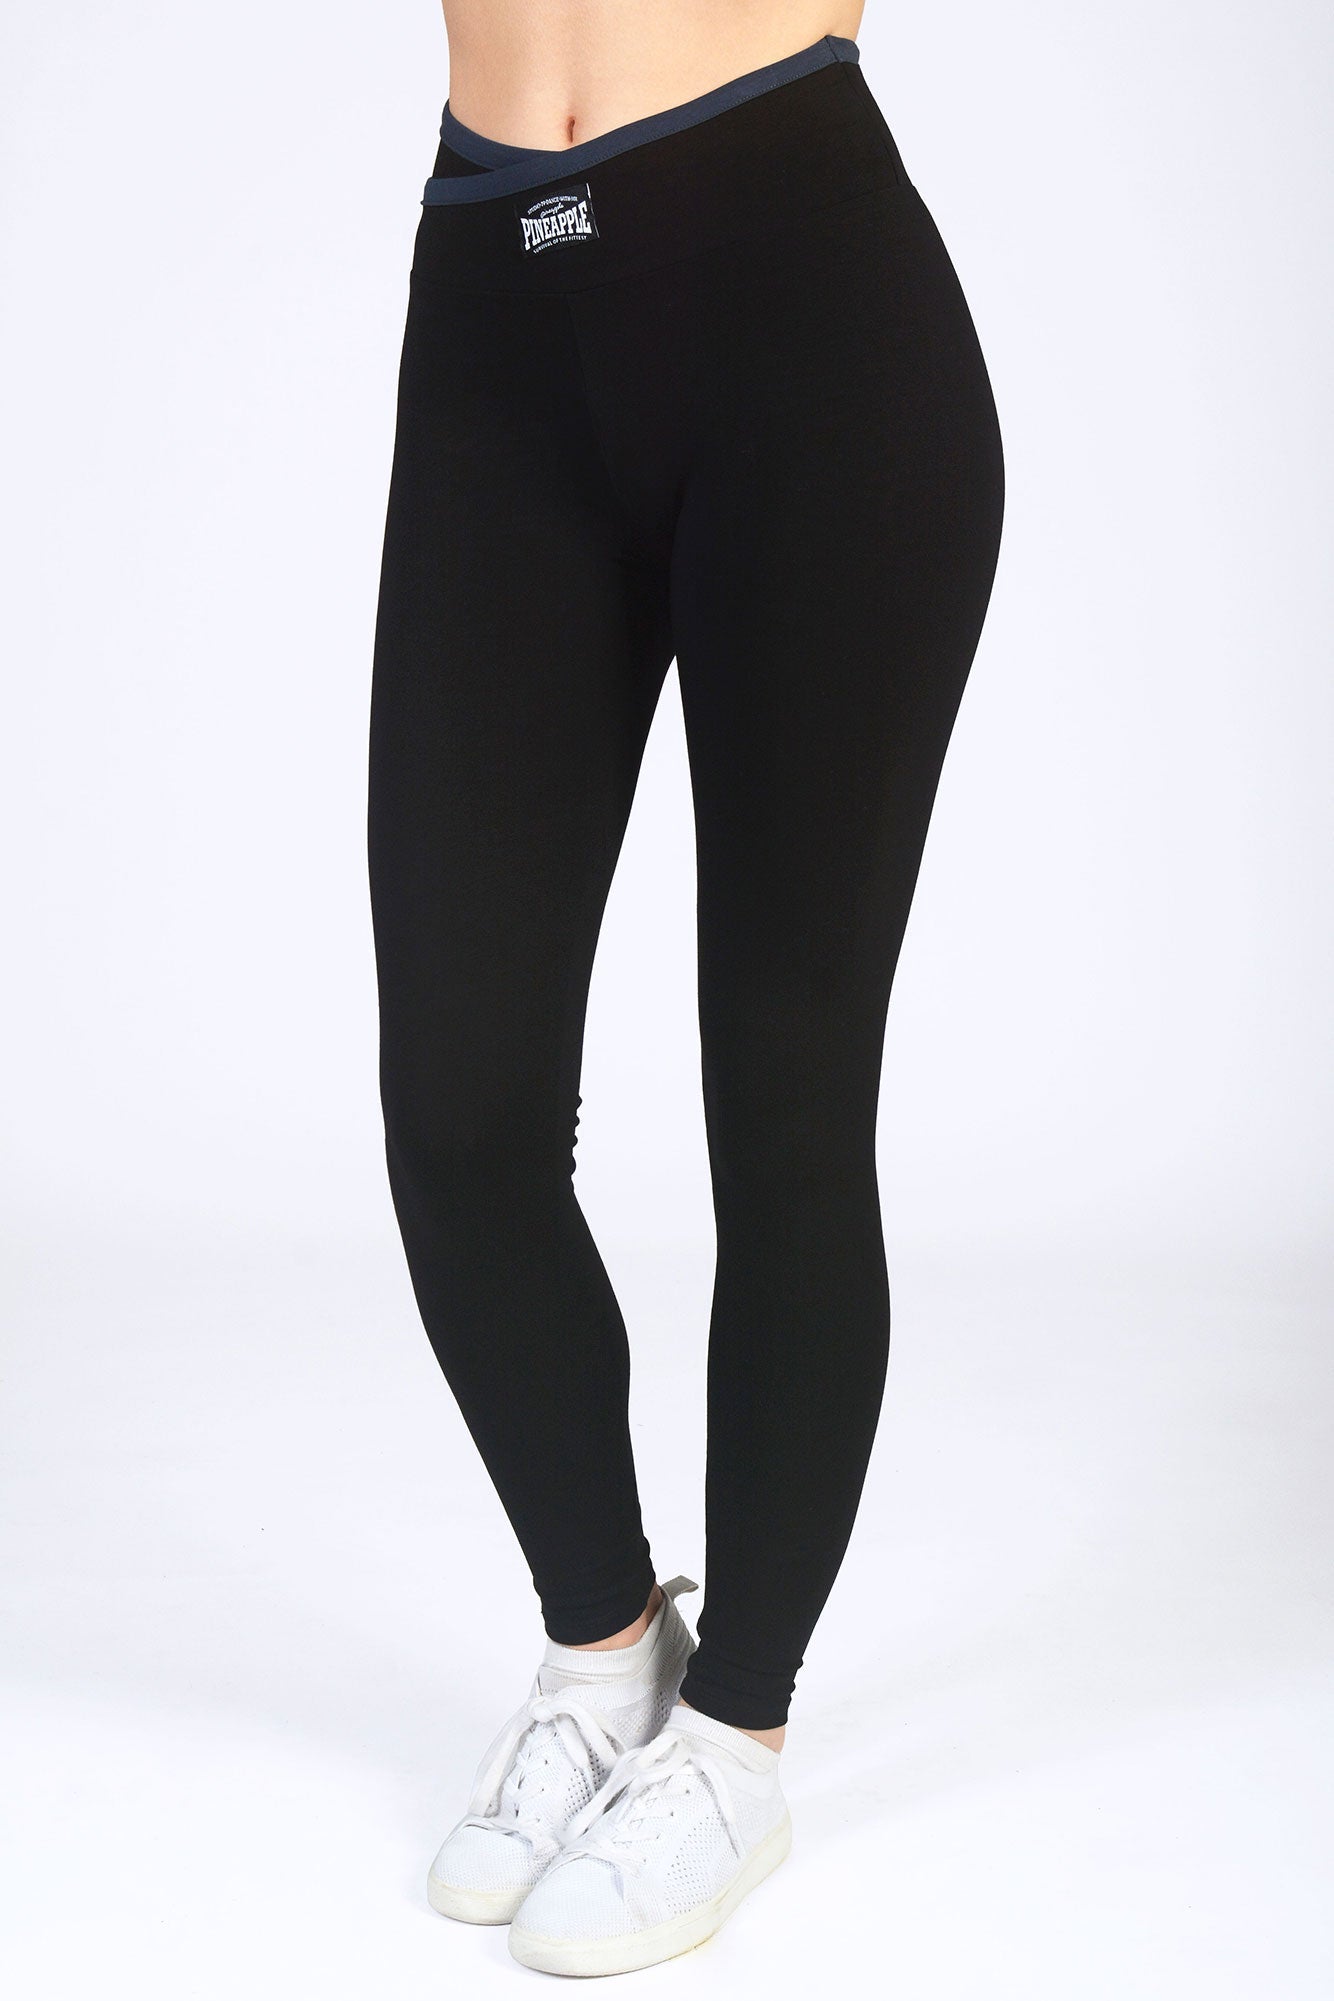 Basic Black Leggings with Charcoal Wrap Band, Pineapple